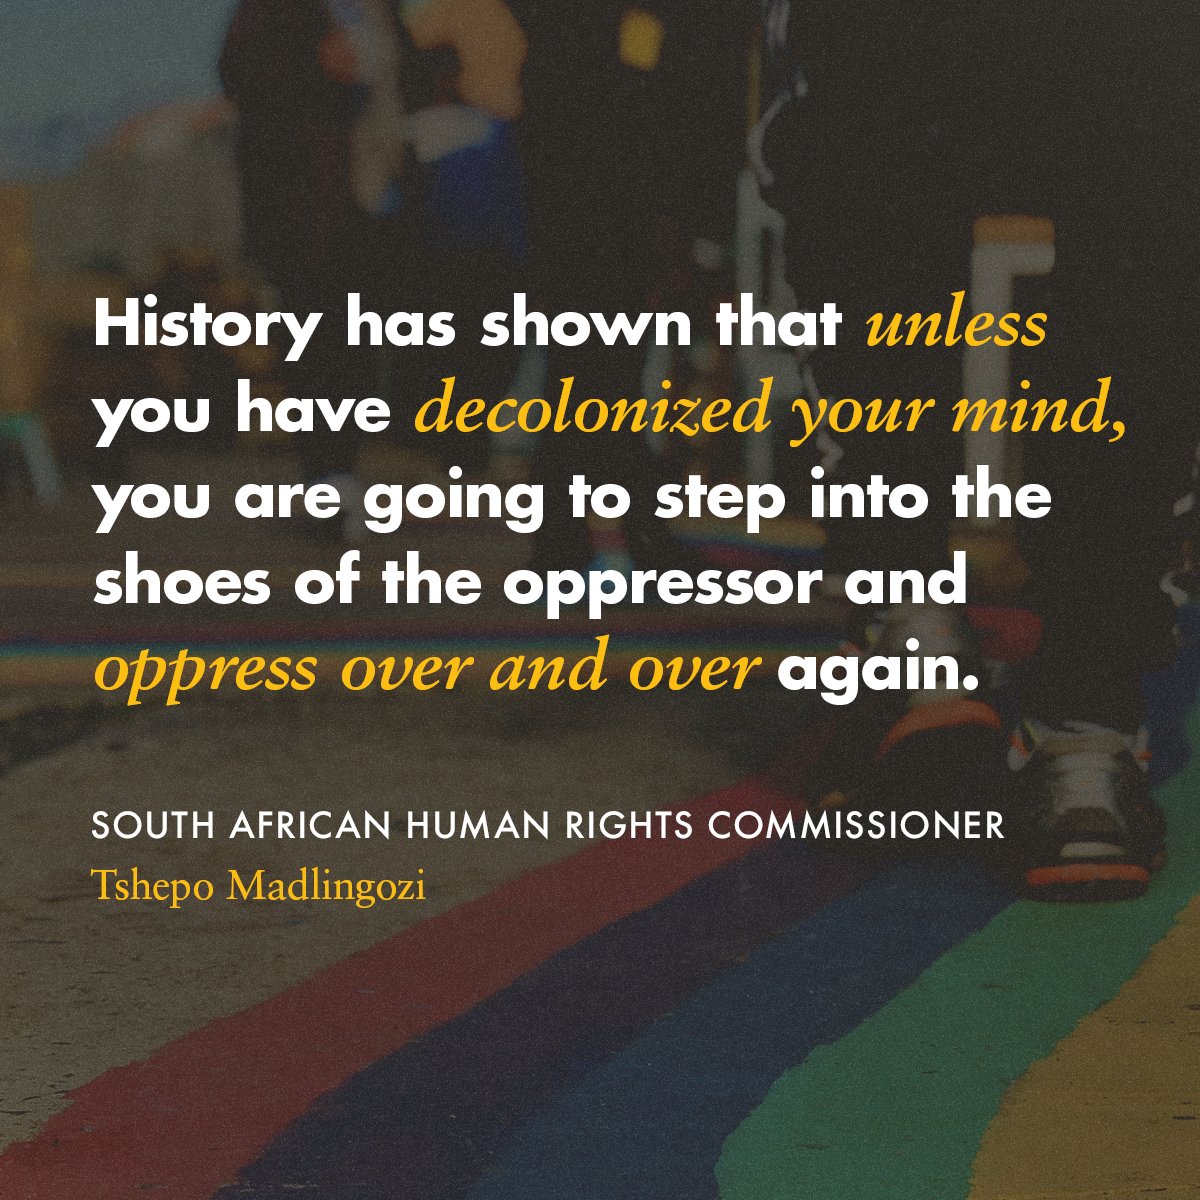 30 years after apartheid, South Africa still grapples with enduring legacies of colonialism & racial discrimination, ranking as world’s most unequal country. Find out the steps South Africans are taking with our Office’s support to decolonize & address systemic discrimination.…